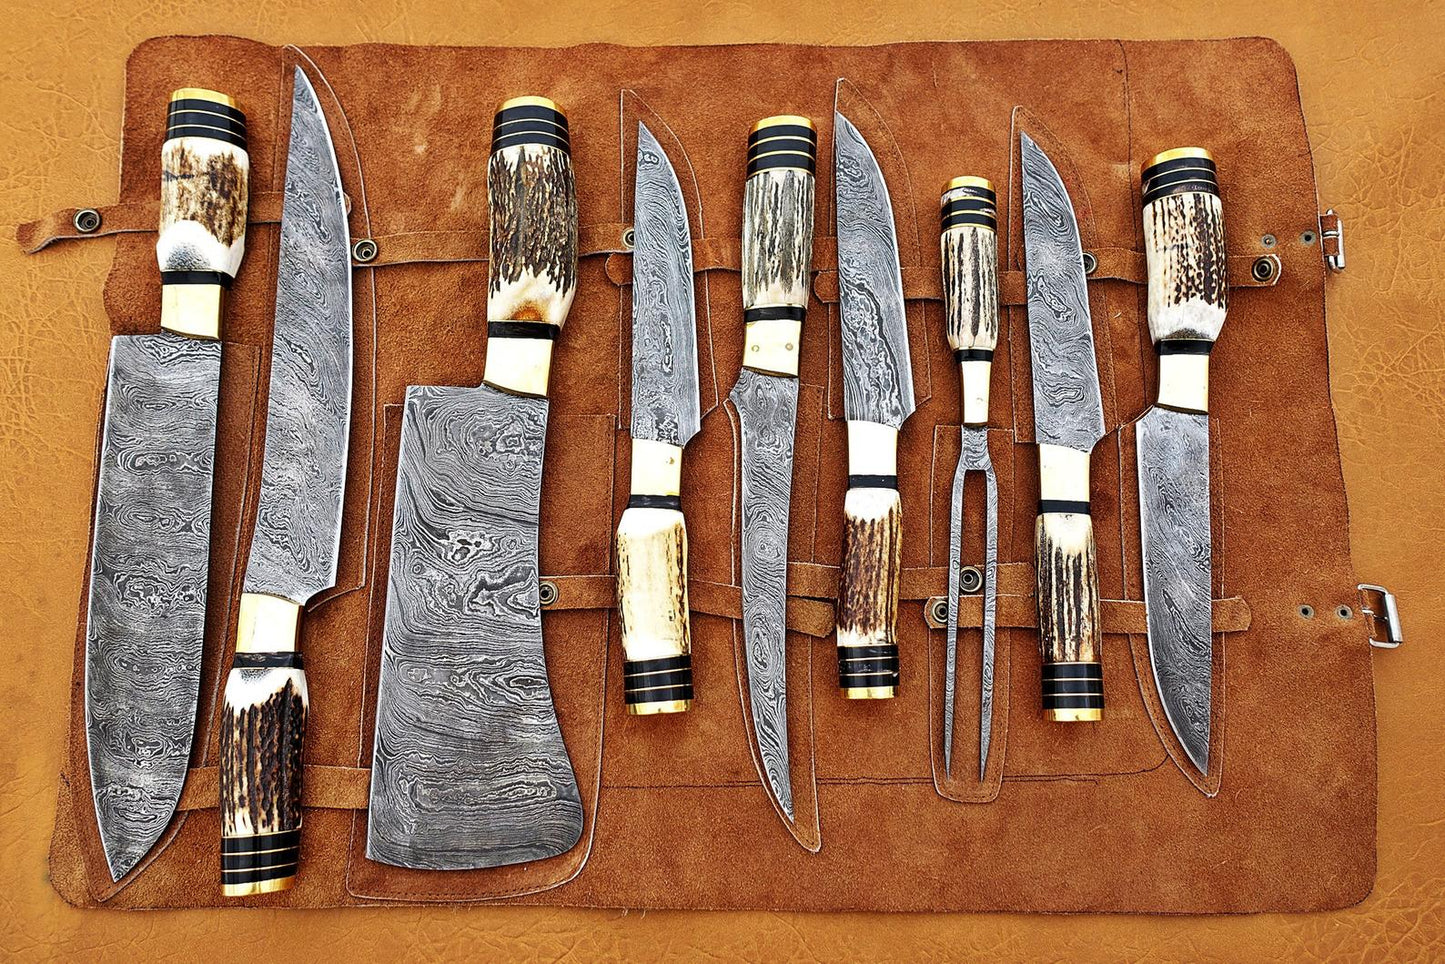 Custom handmade damascus steel kitchen chef set with leather roll 09 pcs/stag horn handles